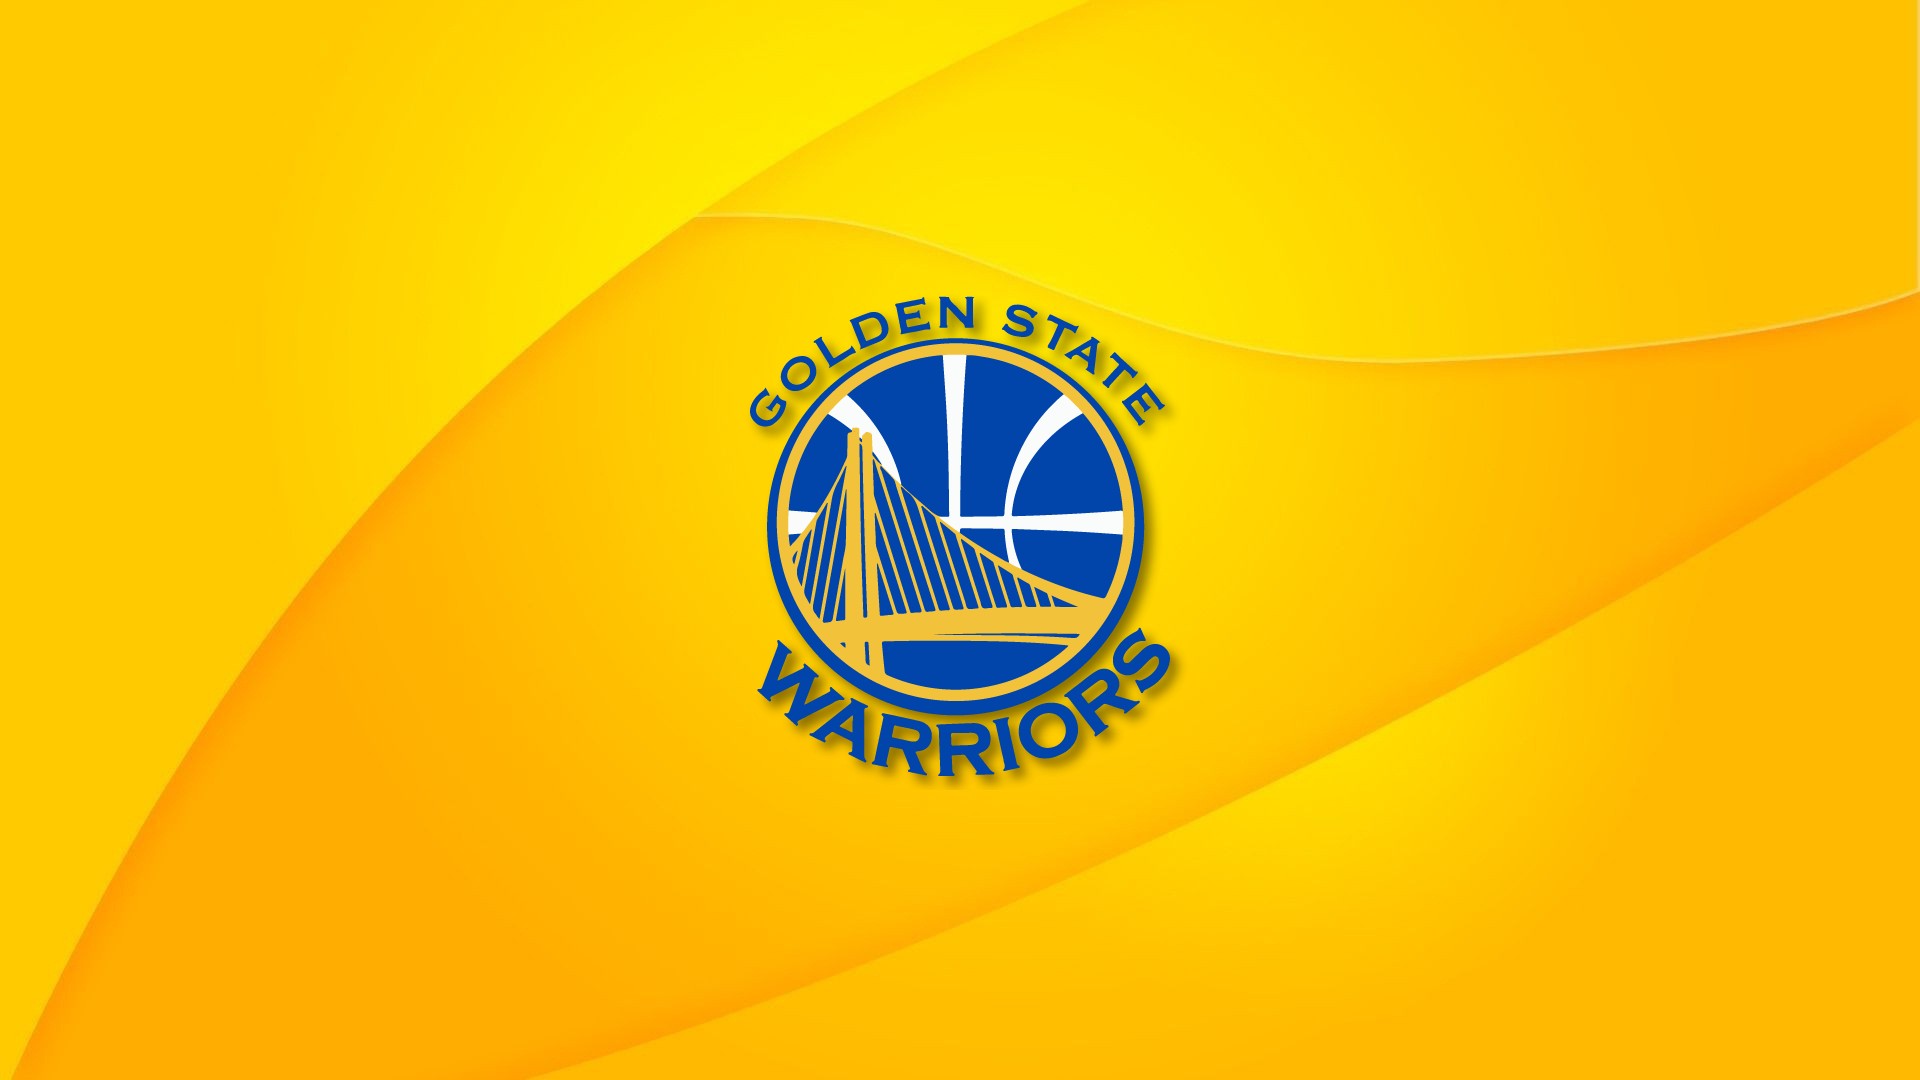 Golden State Warriors HD Backgrounds with image resolution 1920x1080 pixel. You can make this wallpaper for your Desktop Computer Backgrounds, Mac Wallpapers, Android Lock screen or iPhone Screensavers